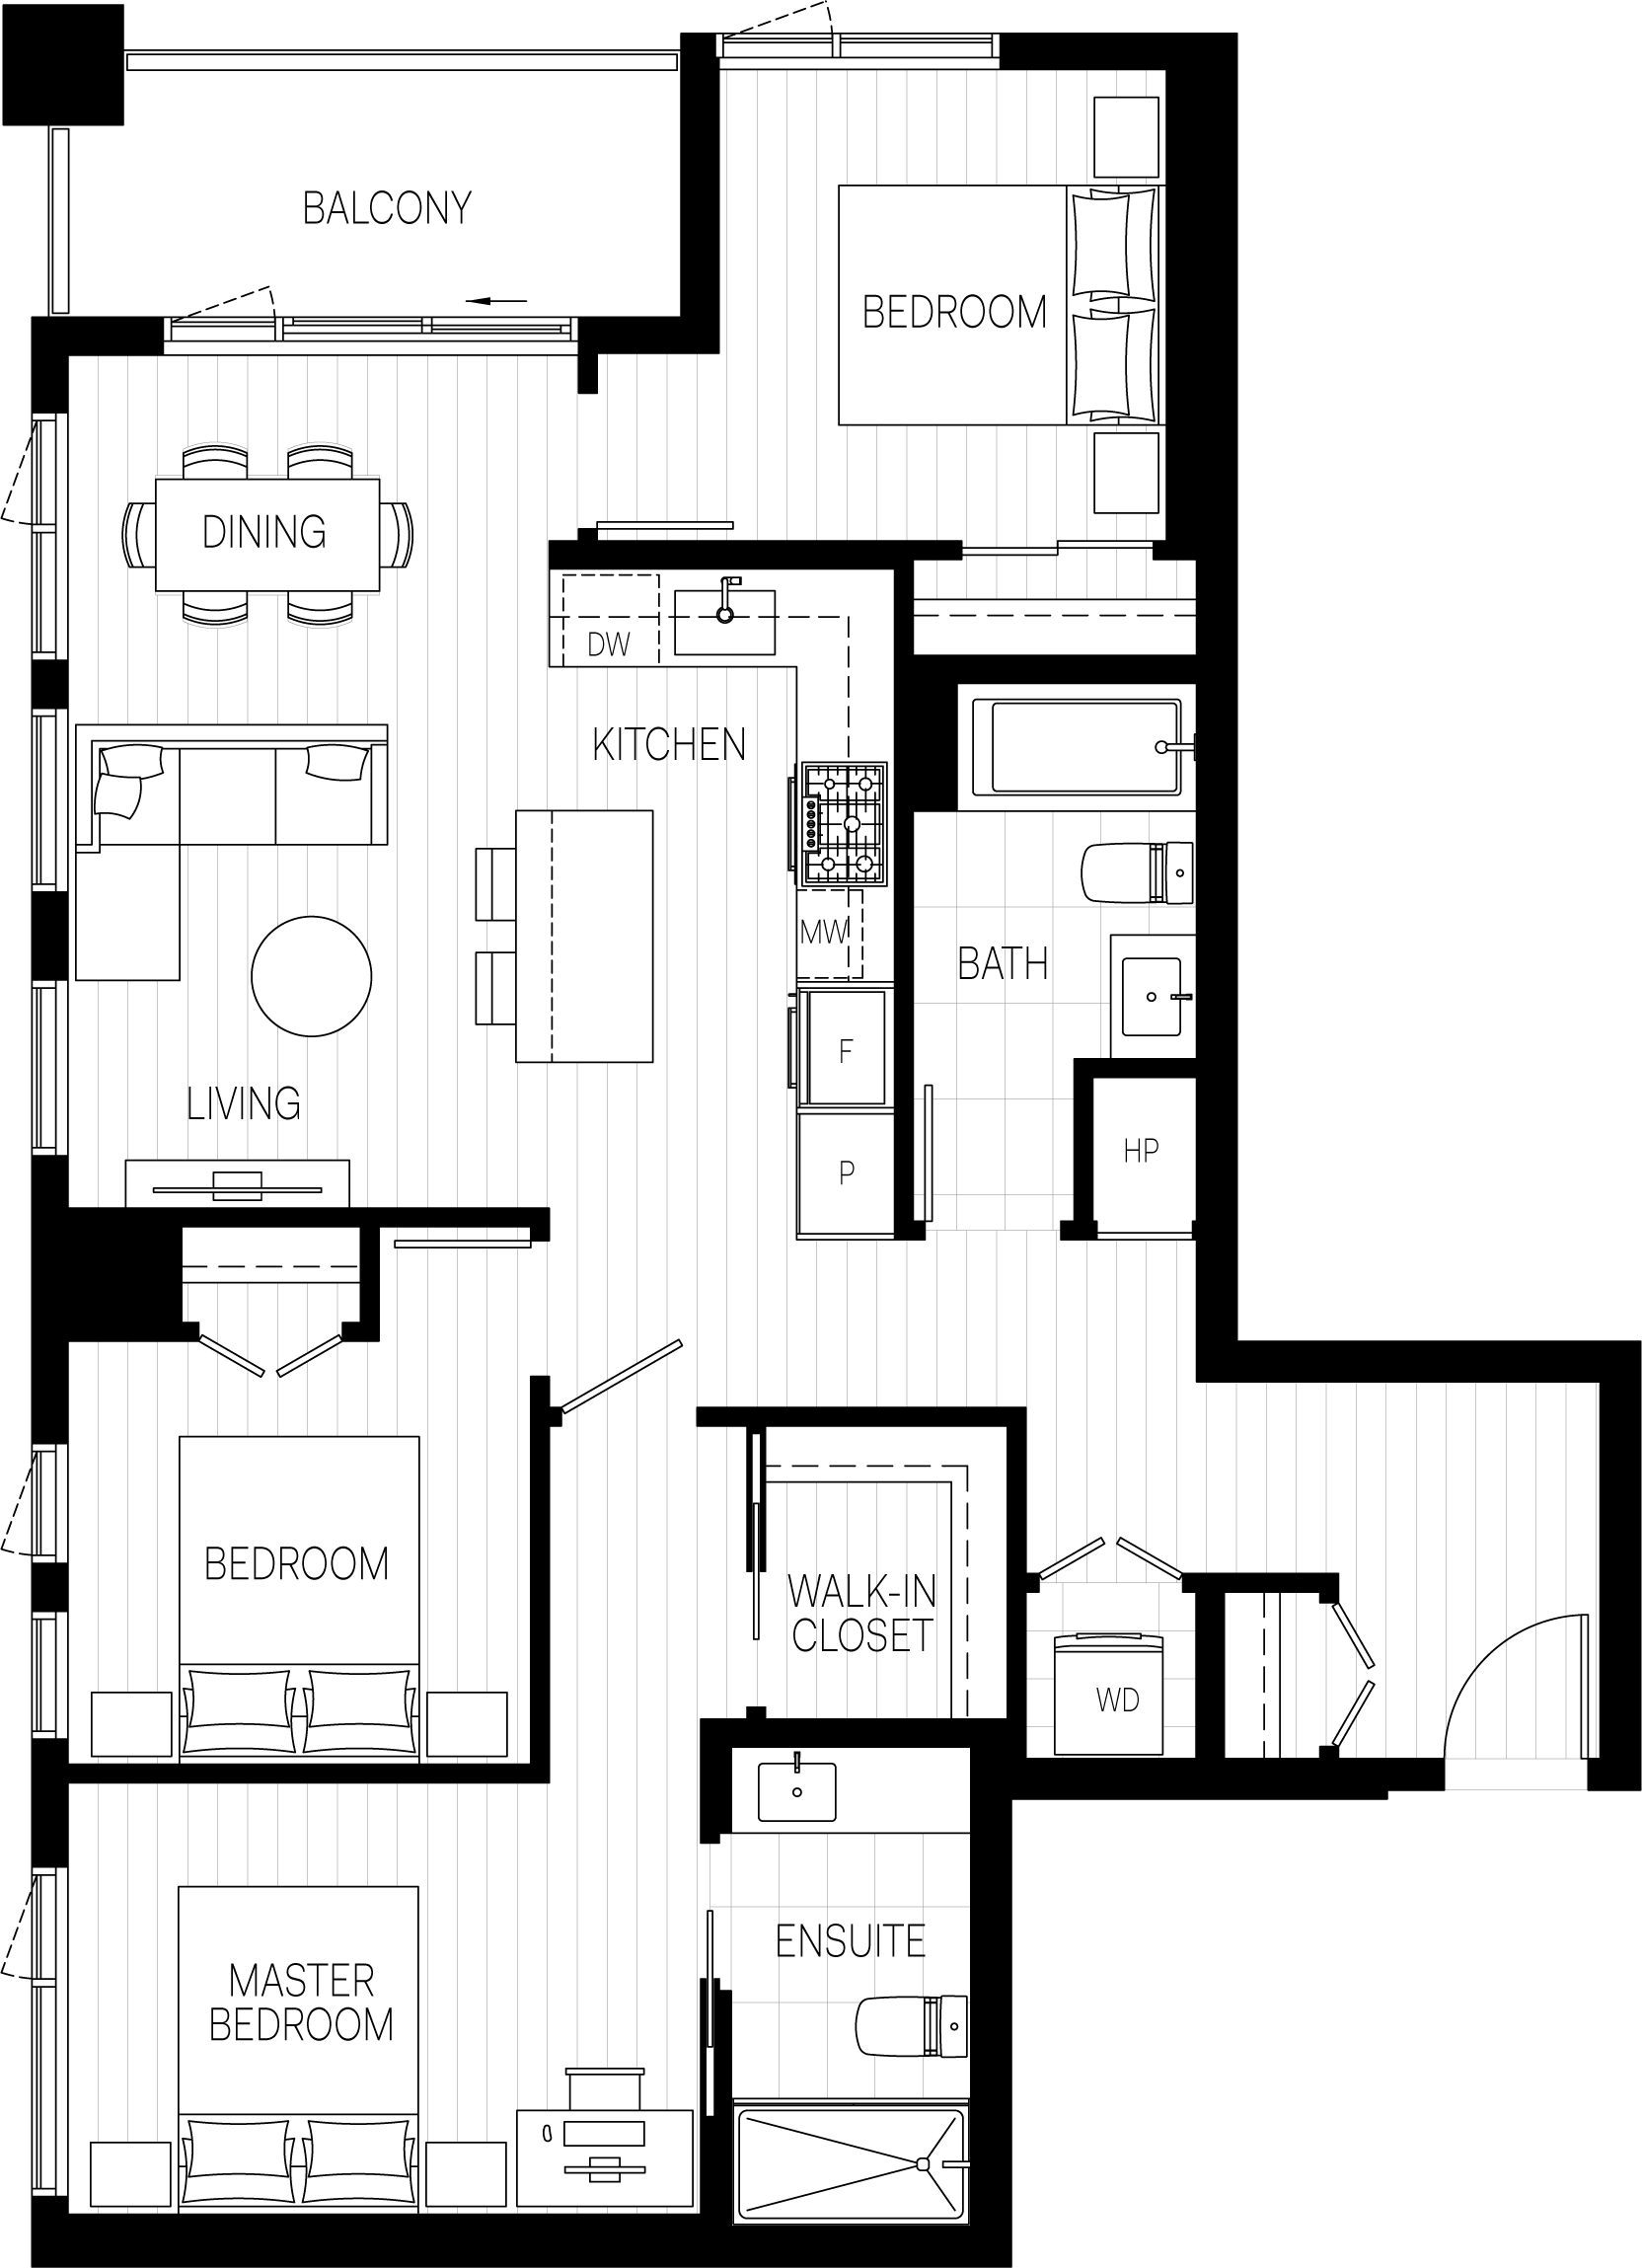 A1 (A) Floor Plan of The Standard Condos with undefined beds